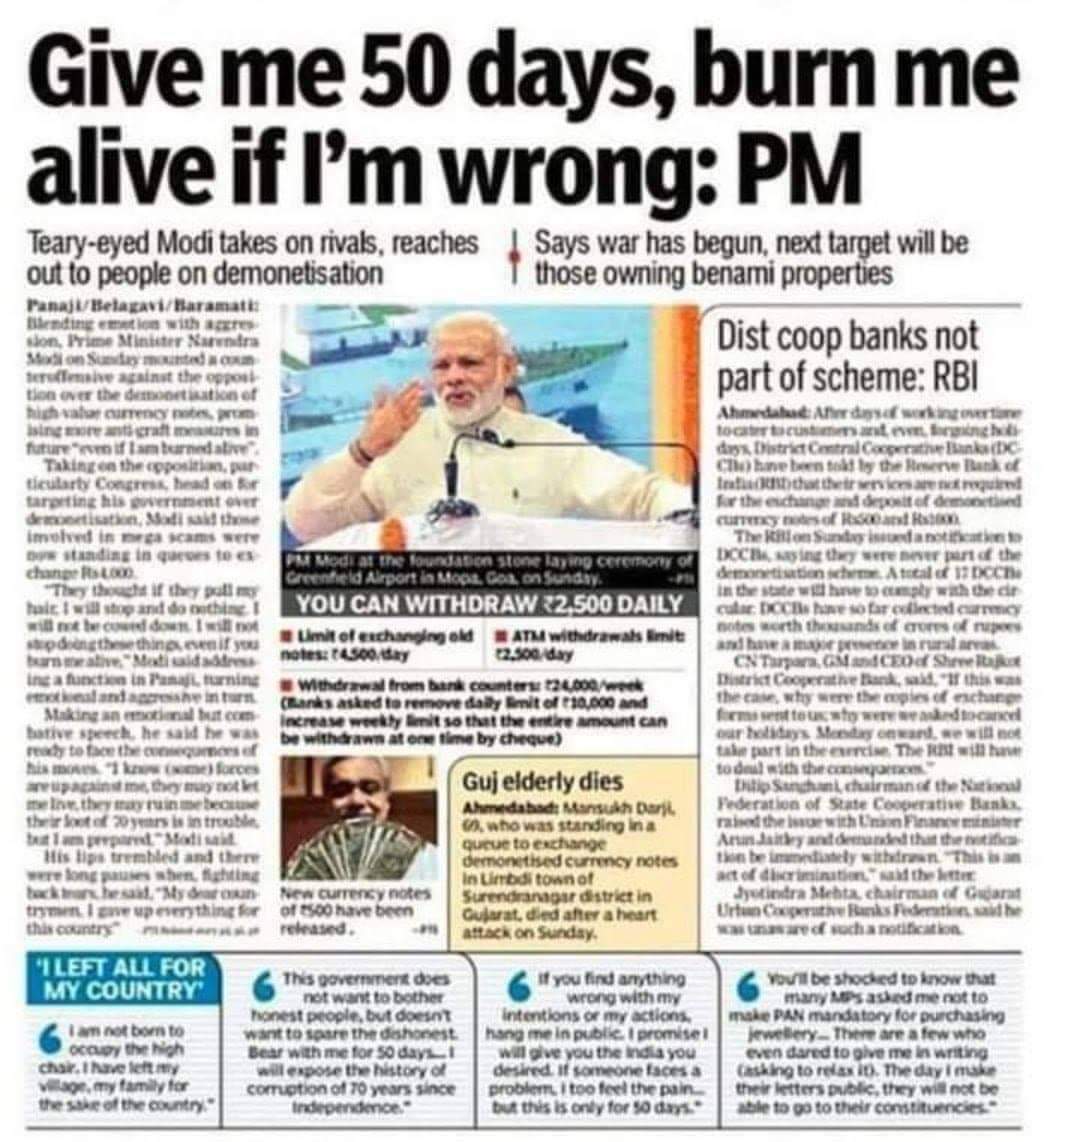 He requested for 50 days!
It's almost 84 months now!

#Demonetization 
#DemonetisationDisaster